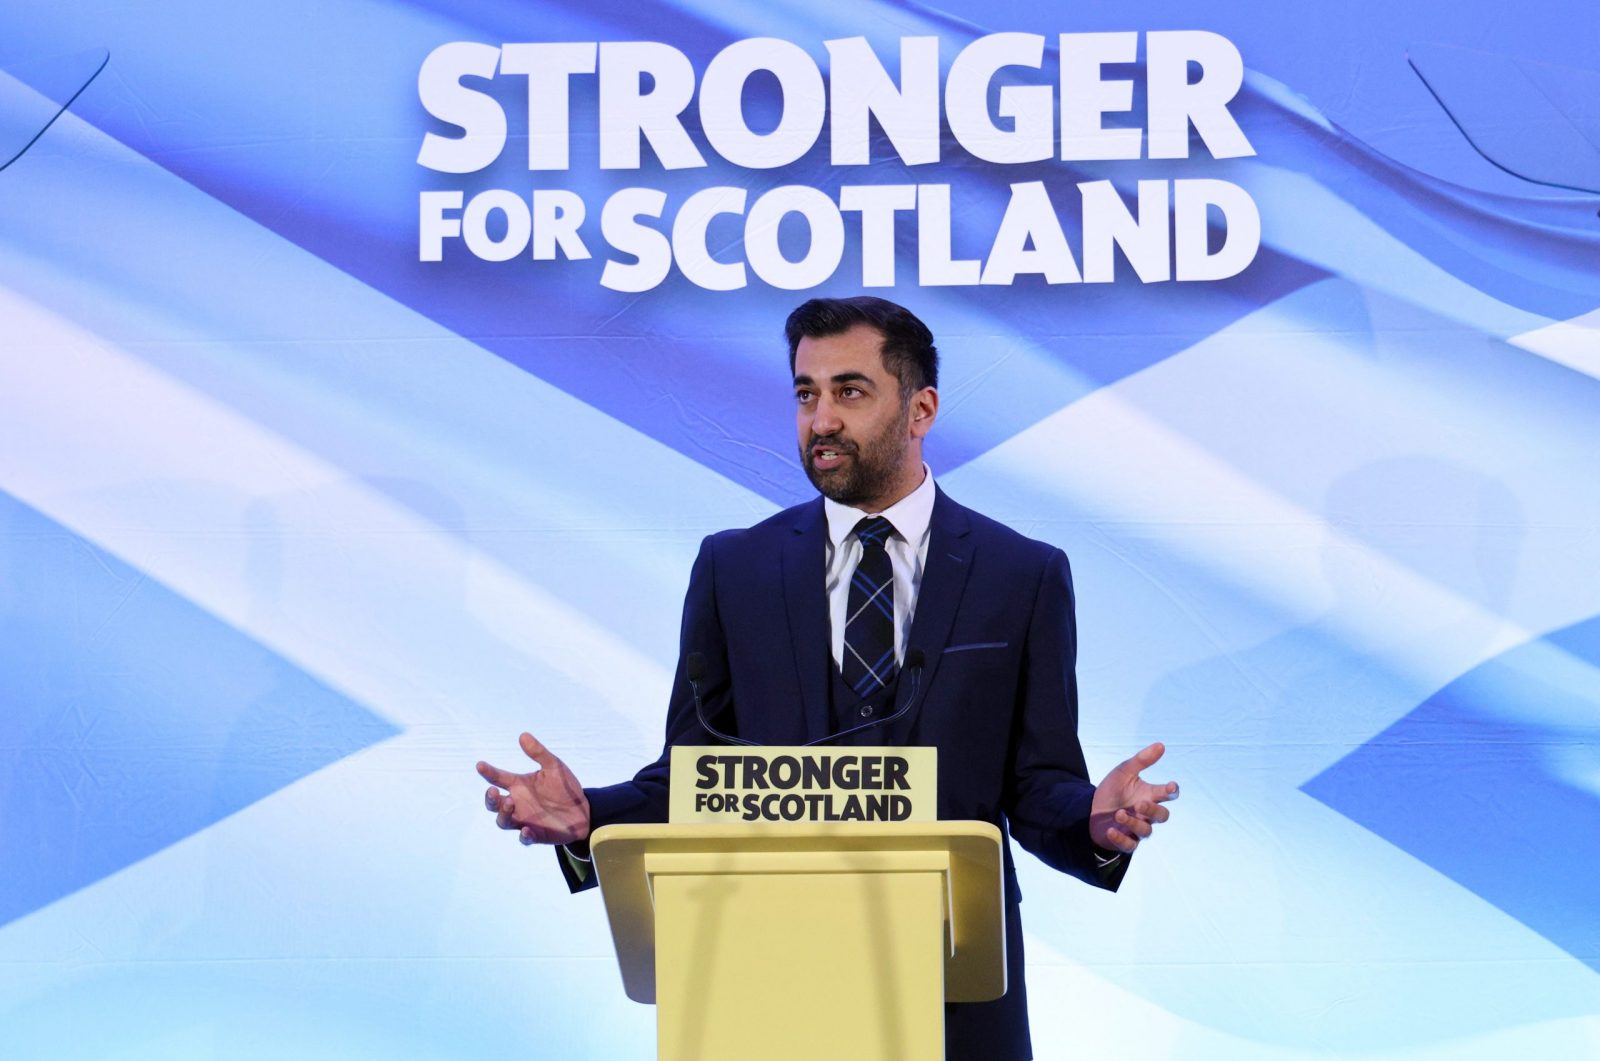 epa10545509 The new leader of the Scottish National Party and former Health Secretary Humza Yousaf speaks after he is announced at Murrayfield Stadium in Edinburgh, Scotland, Britain 27 March 2023. The result follows a five-week contest after the former leader and First Minister Nicola Sturgeon stood down. There will be a vote in Holyrood parliament on 28 March to select the next first minister.  EPA/ROBERT PERRY